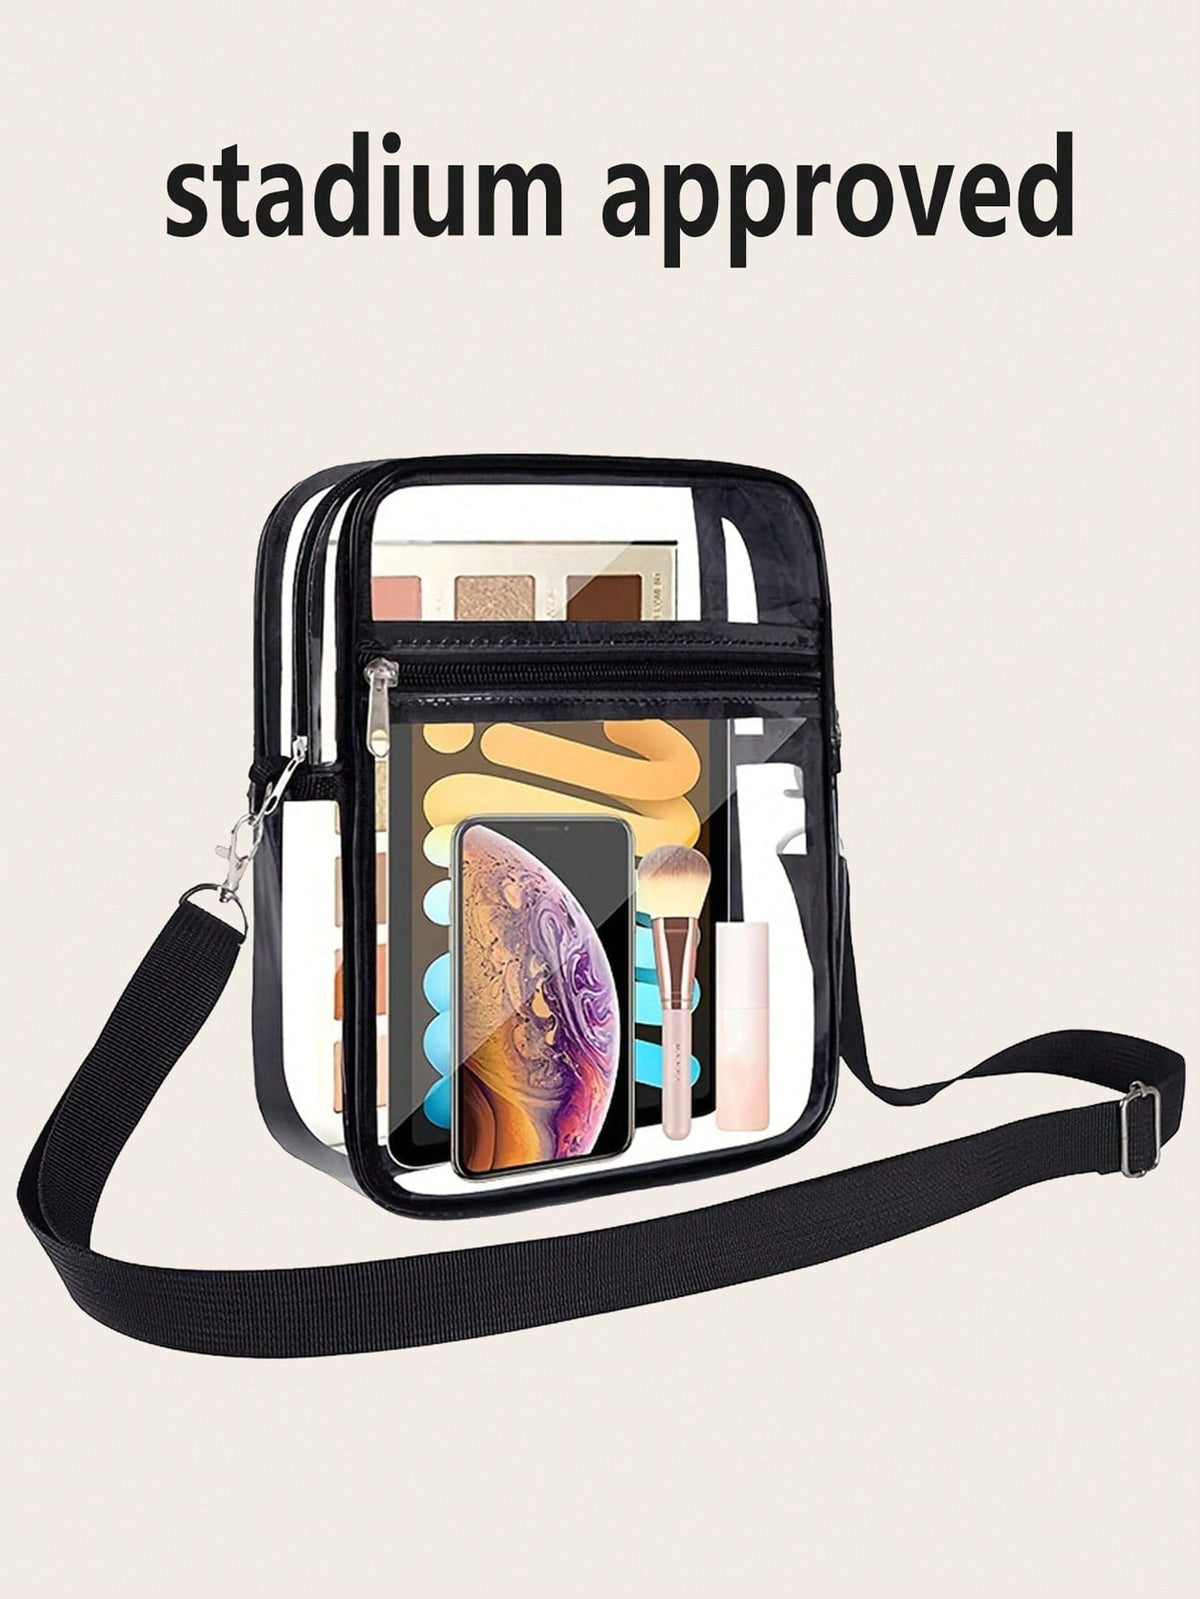 Clear Crossbody Bag, Stadium Approved Zipper Clear Purse Bag For Concerts Sports Events Festivals With Adjustable Shoulder Strap For Women And Men Pvc Bag, Fashion Clear Satchel Gift Cute See Through Shoulder Bag, Transparent Crossbody Purse Stadium Appr